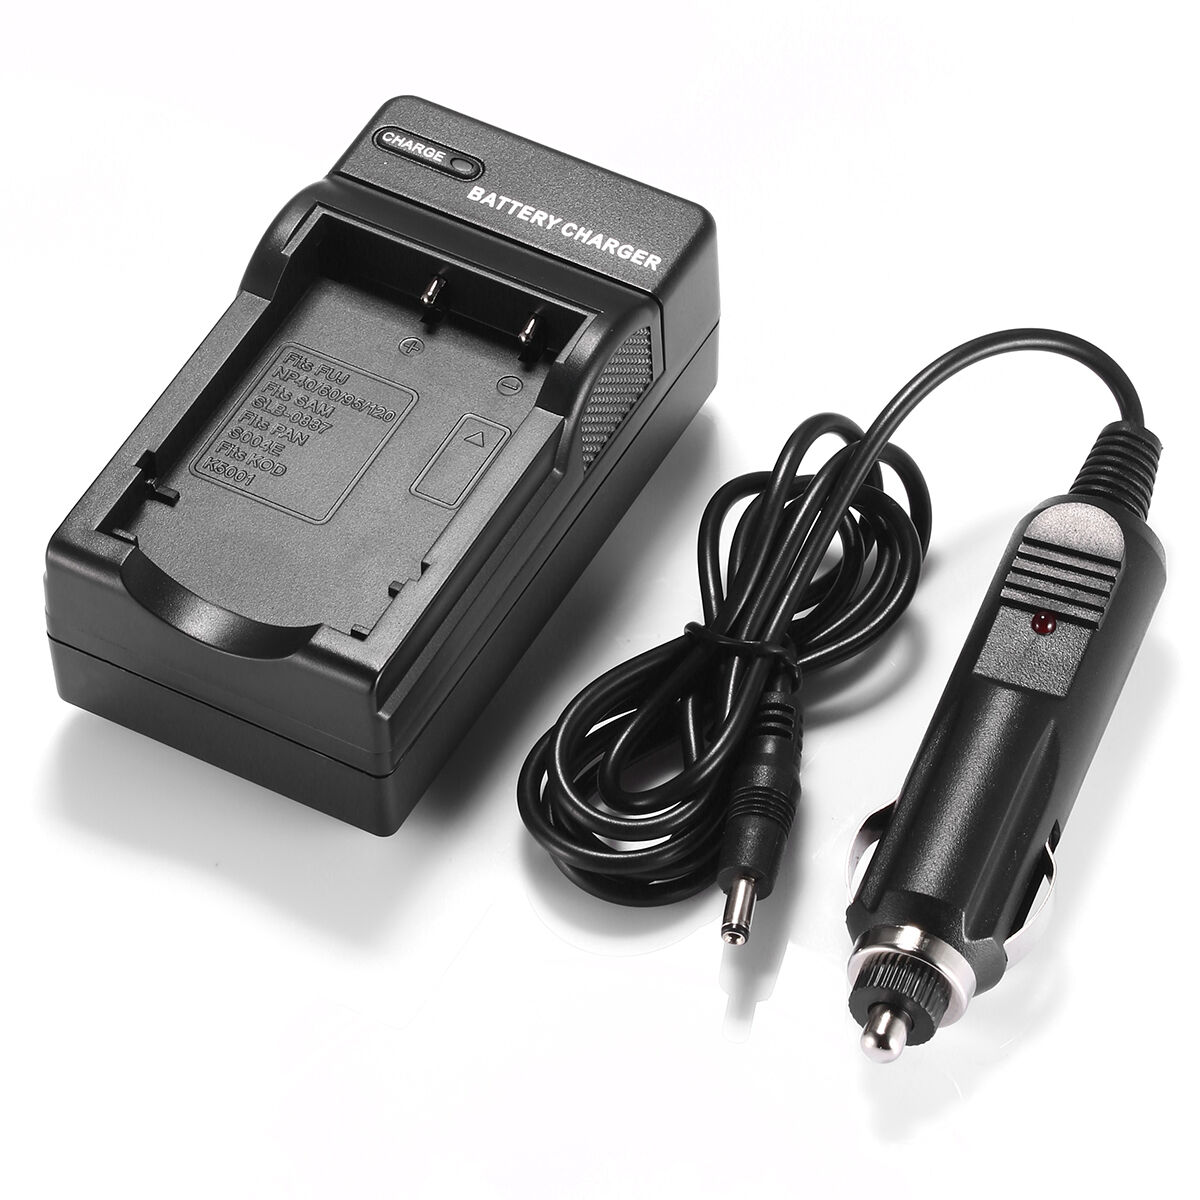 CASIO NP-90 battery charger